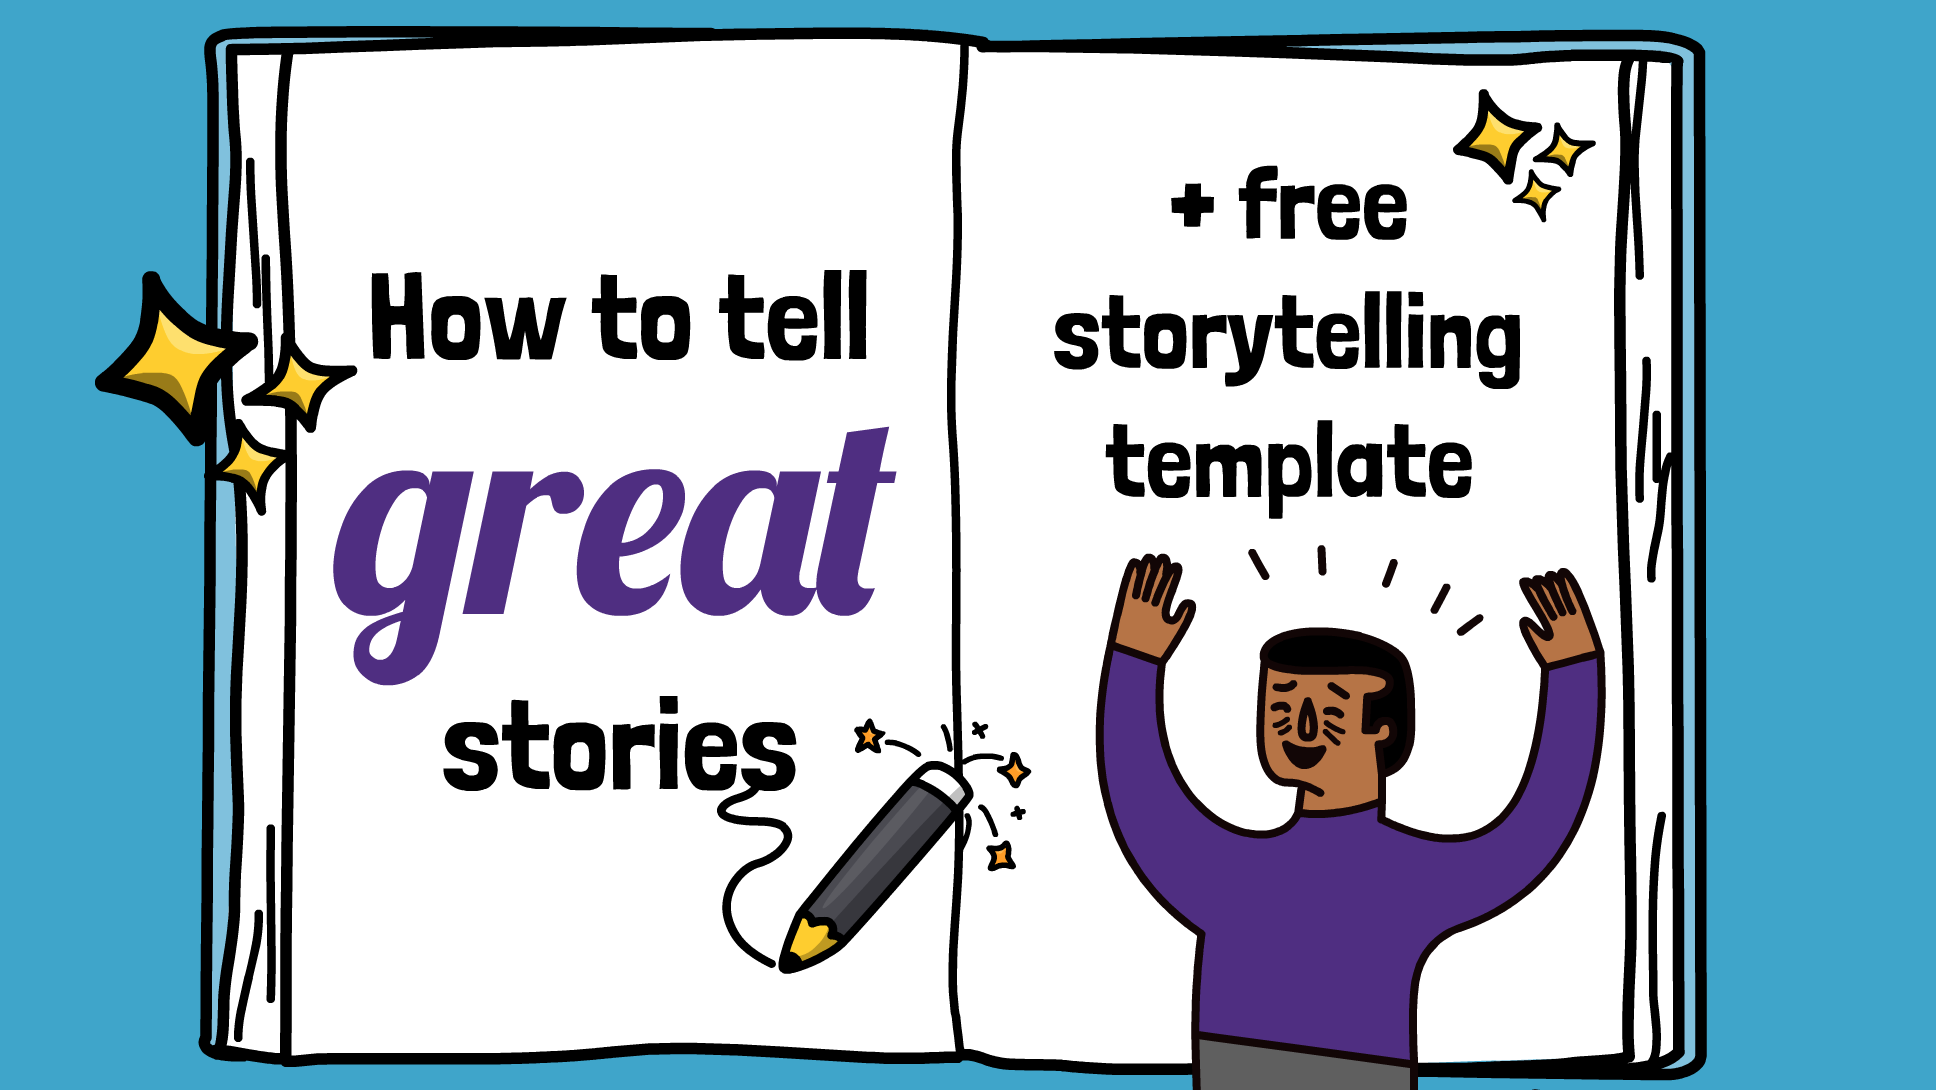 How to tell great stories [+ free storytelling template]